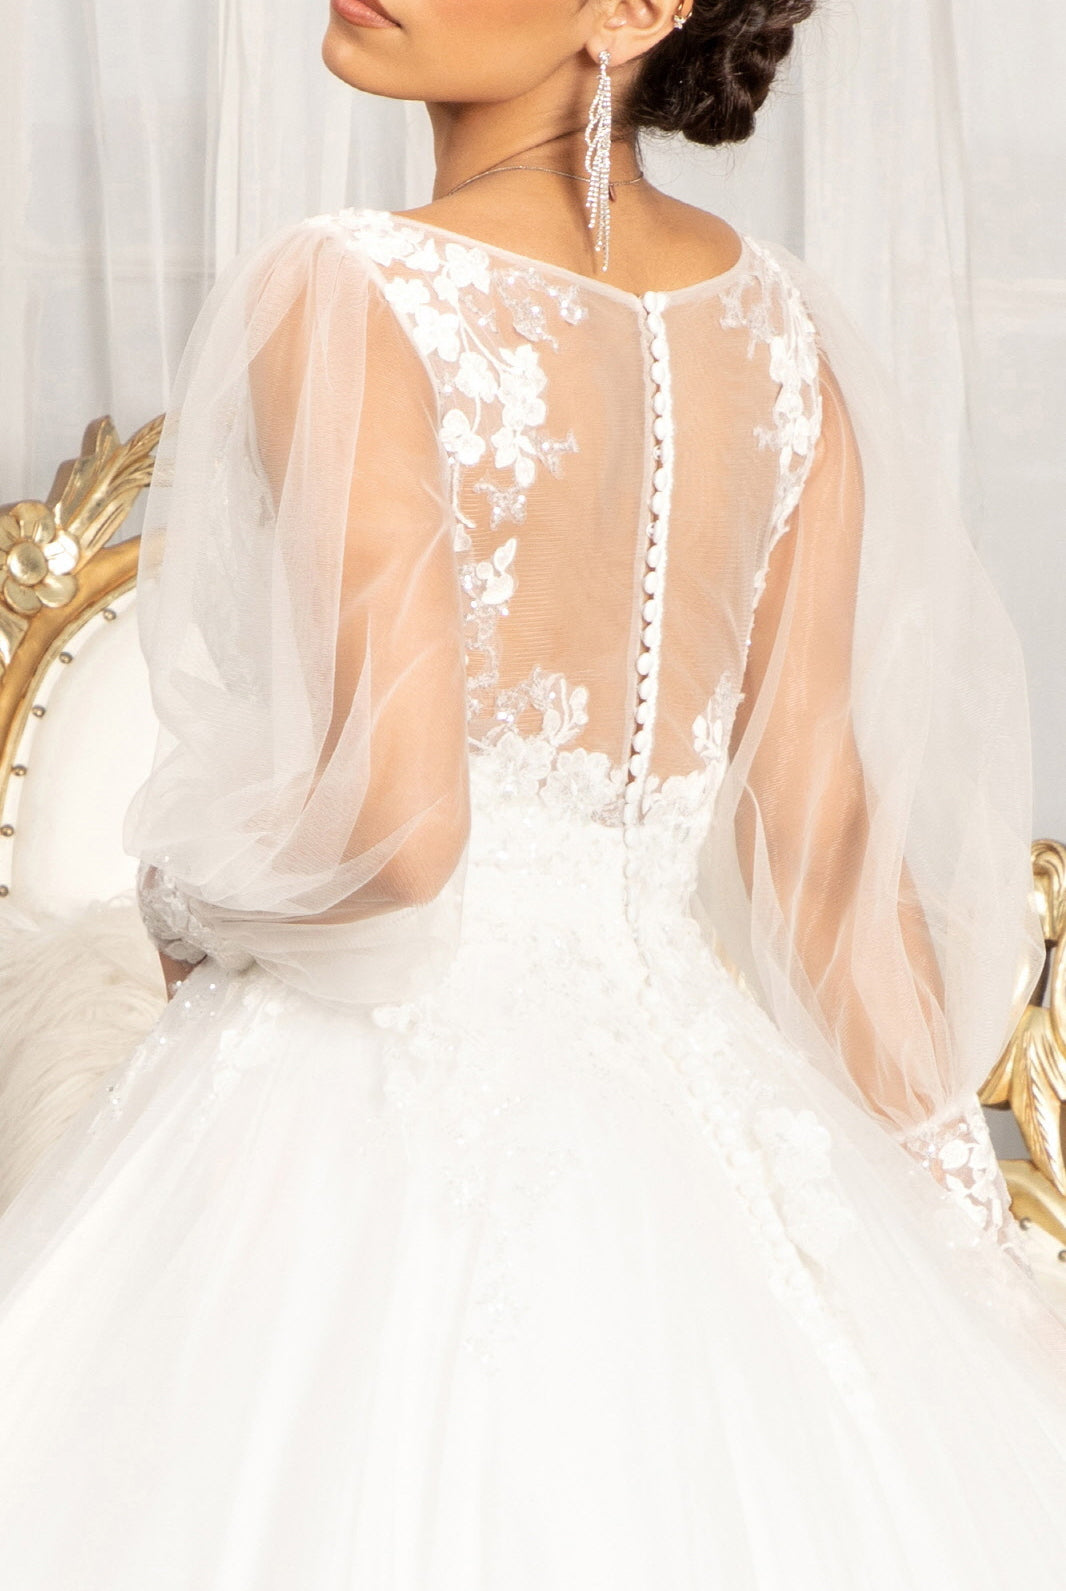 Beads Embellished Wedding Gown with Sheer Back-smcdress